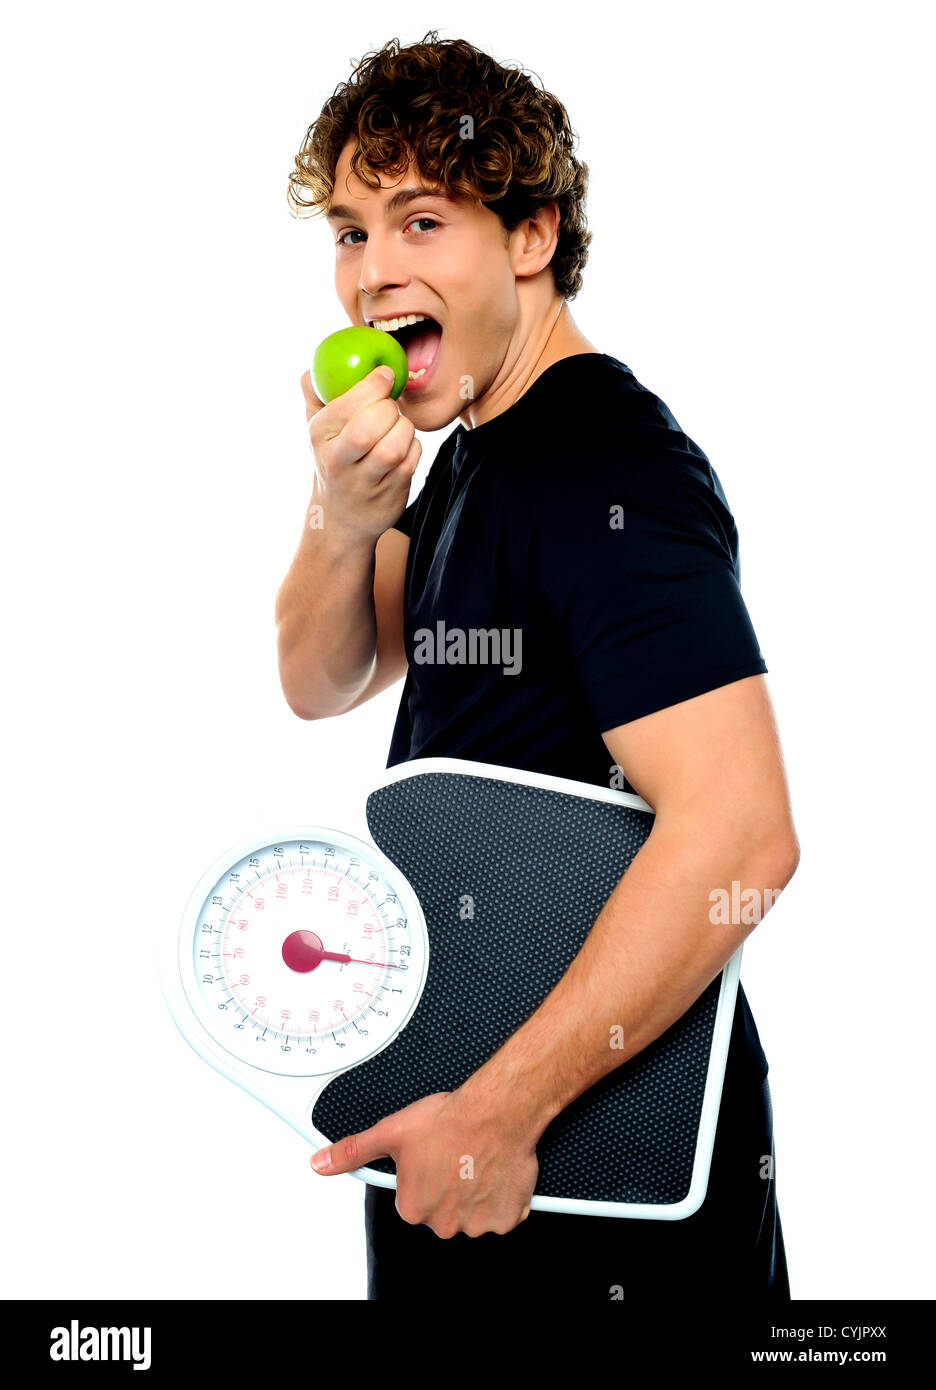 https://c8.alamy.com/comp/CYJPXX/smart-boy-eating-green-apple-with-scale-in-his-other-hand-CYJPXX.jpg